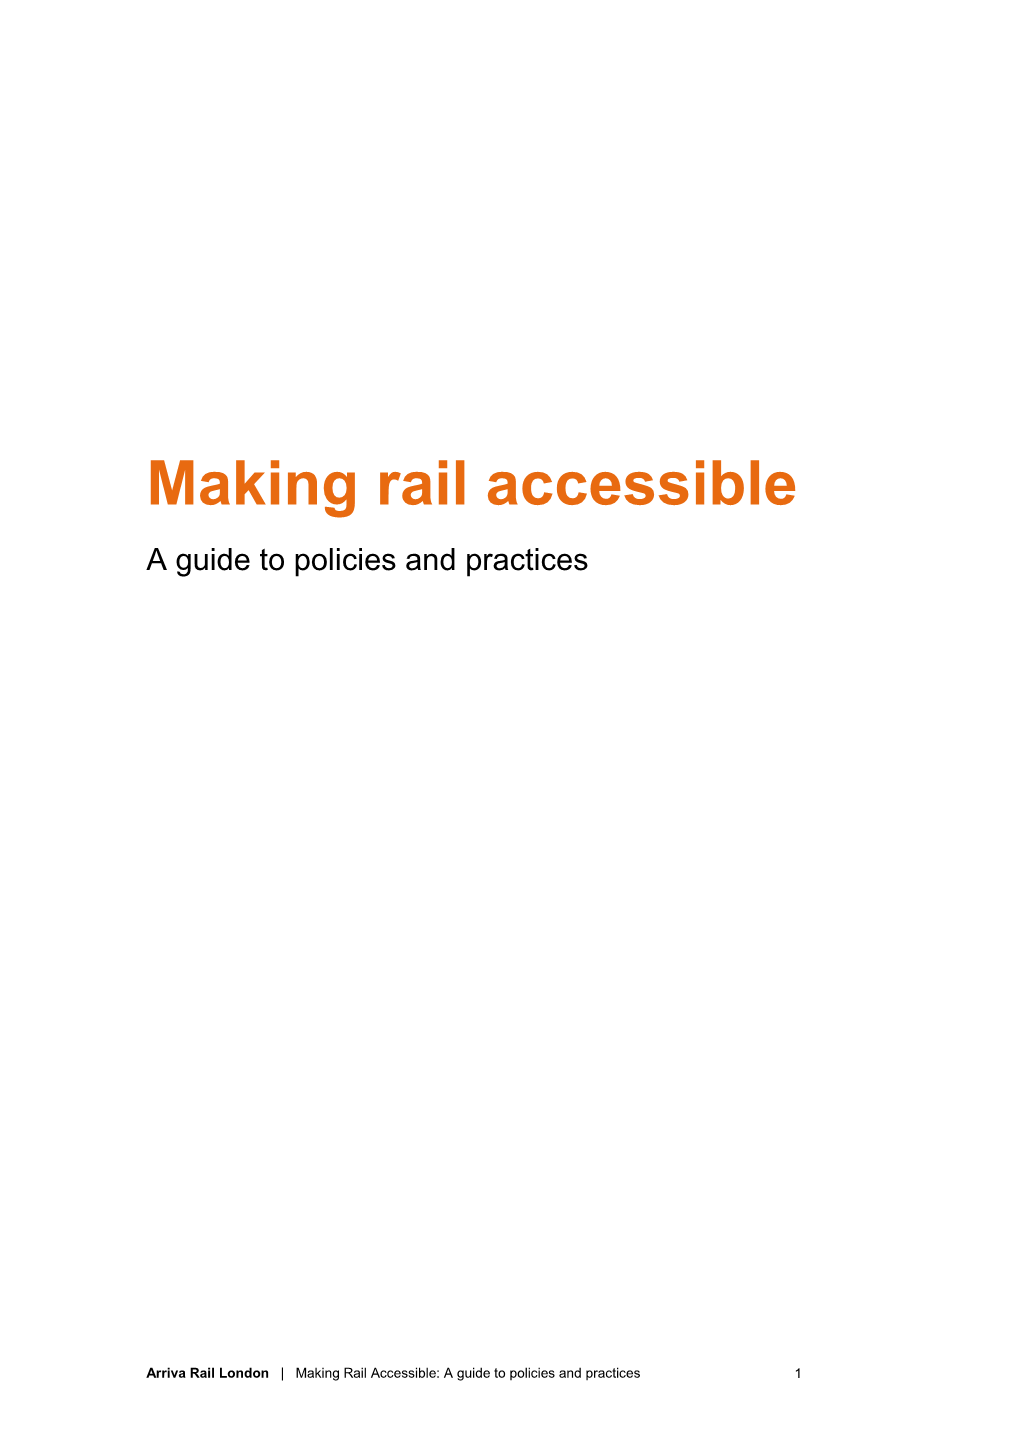 Making Rail Accessible